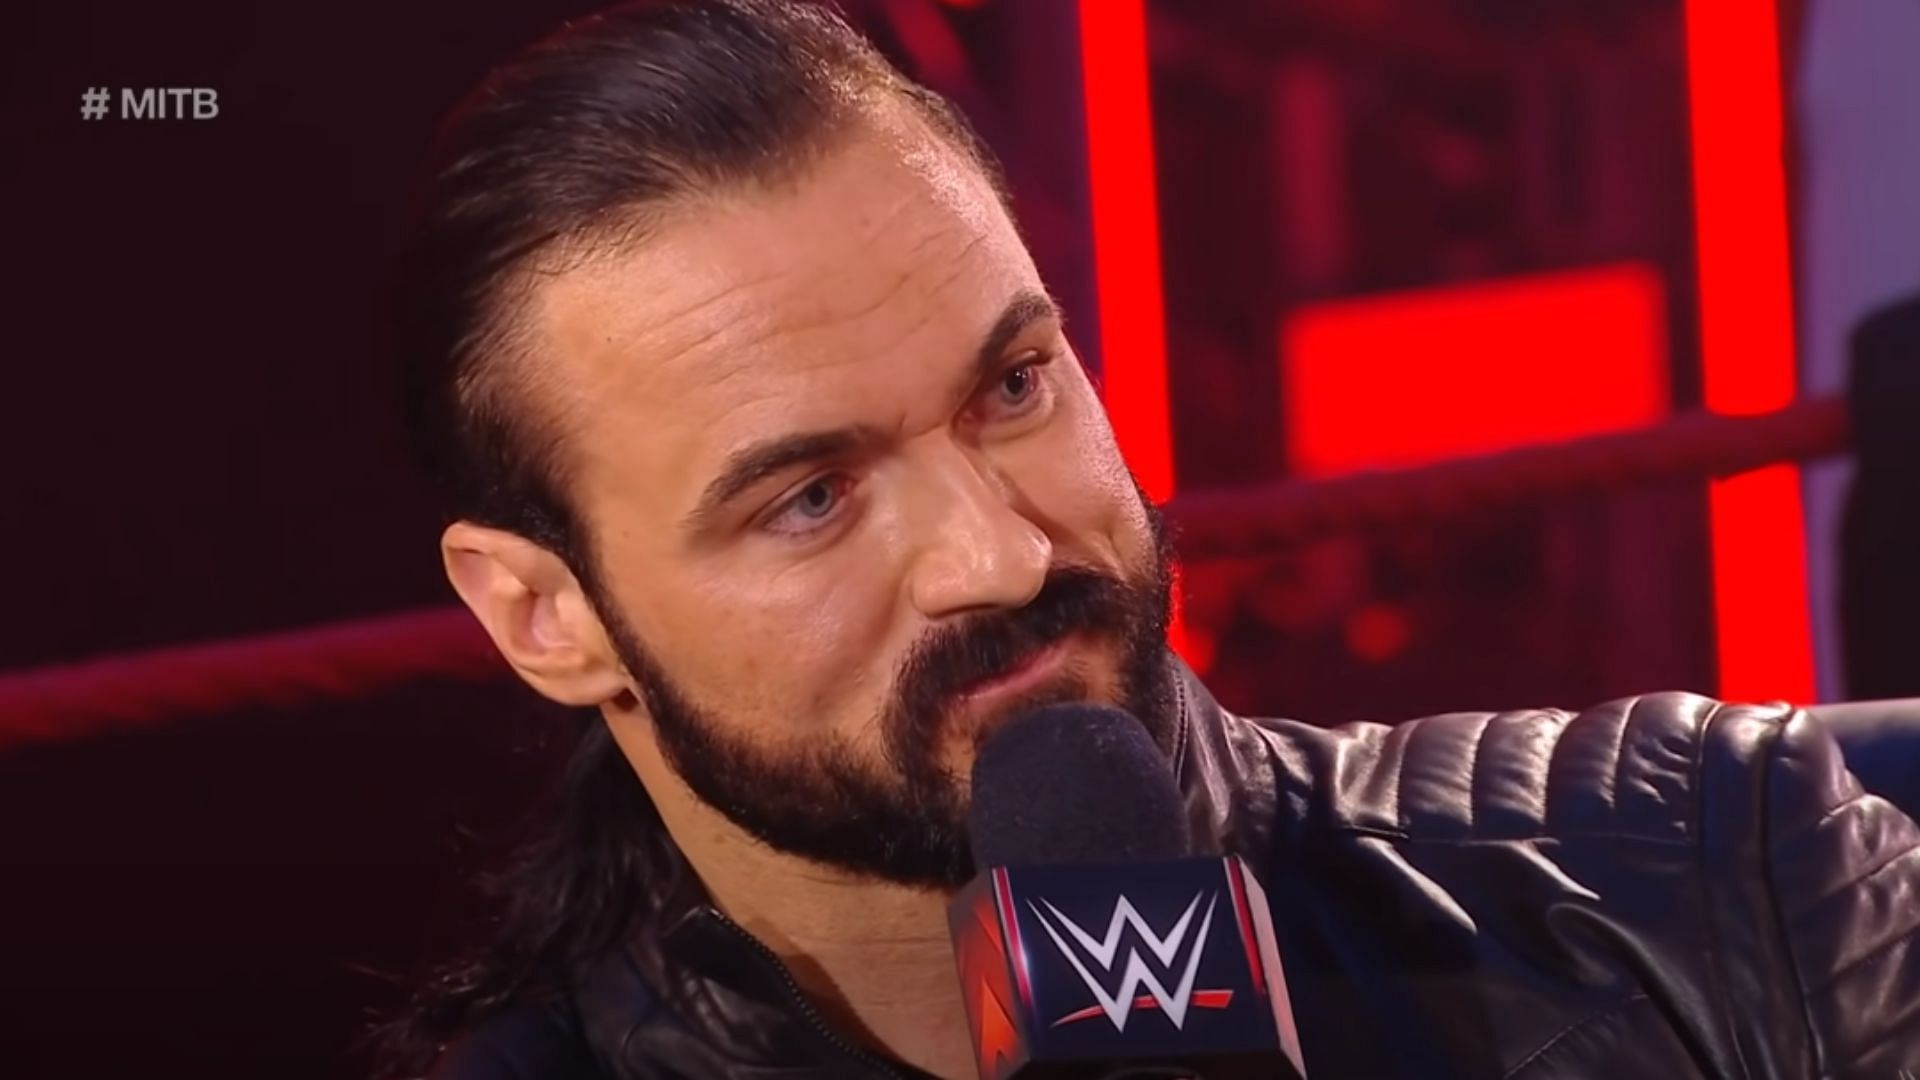 Drew McIntyre was unable to compete due to illness.